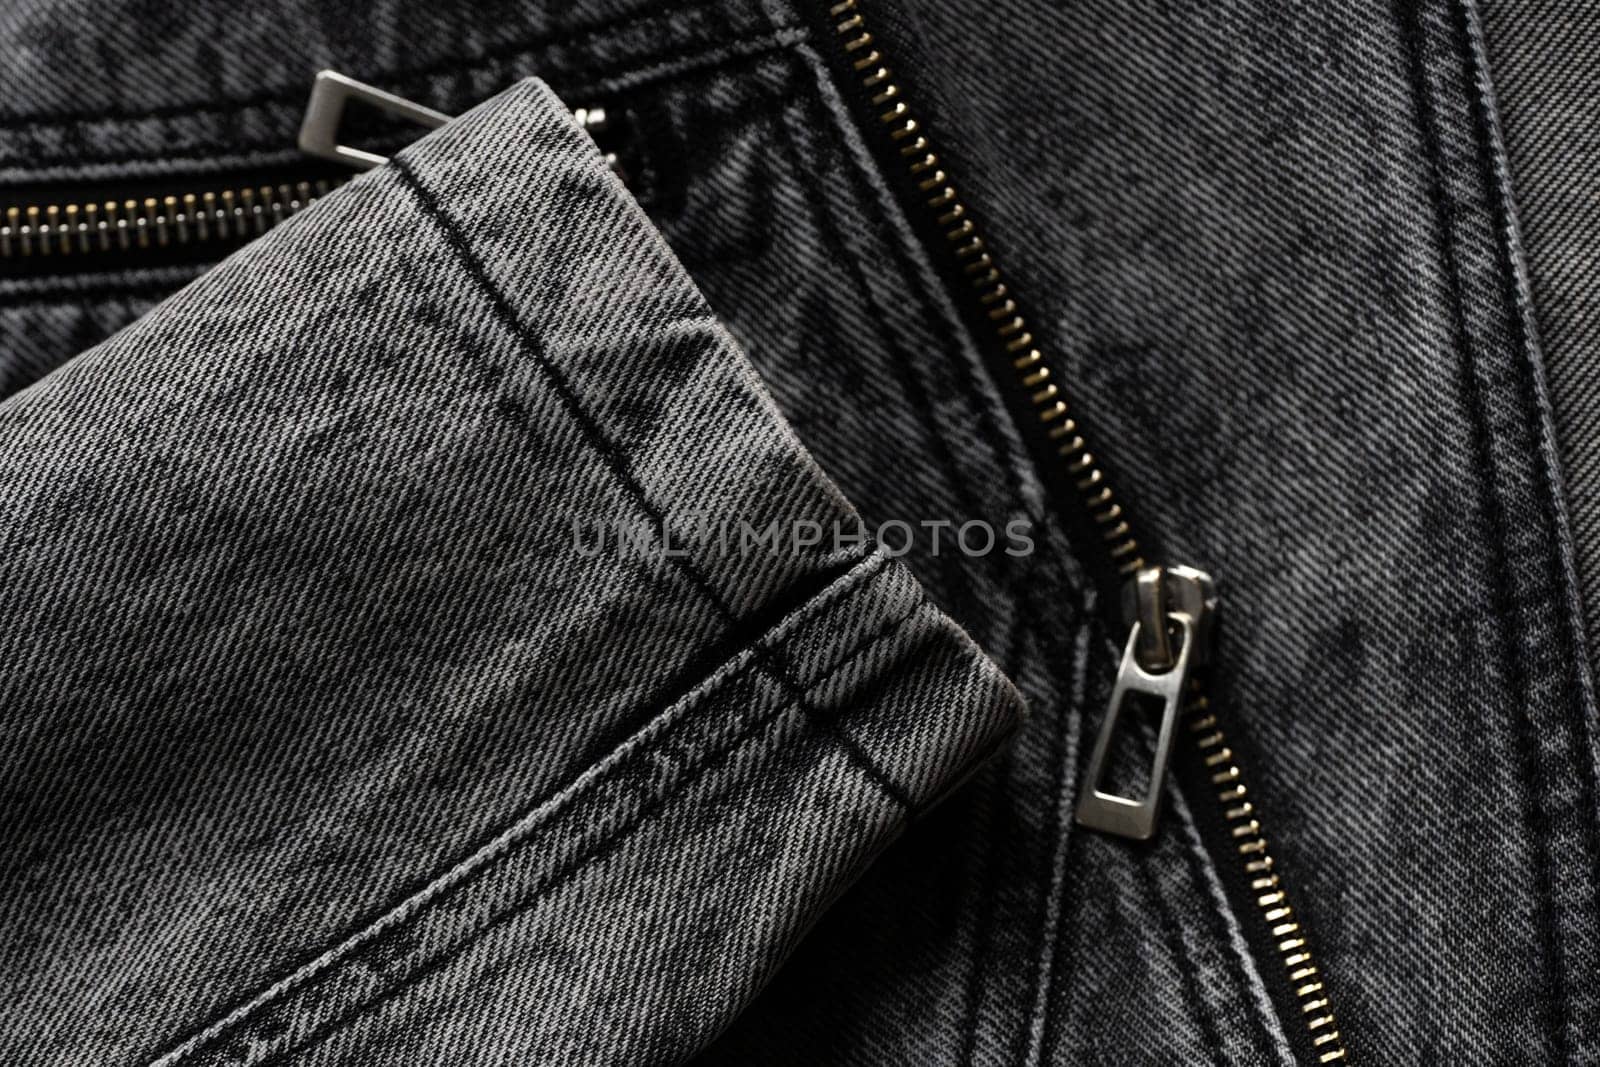 Denim texture pattern jacket with zipper background. Fashion, style and textile concept. High quality photo